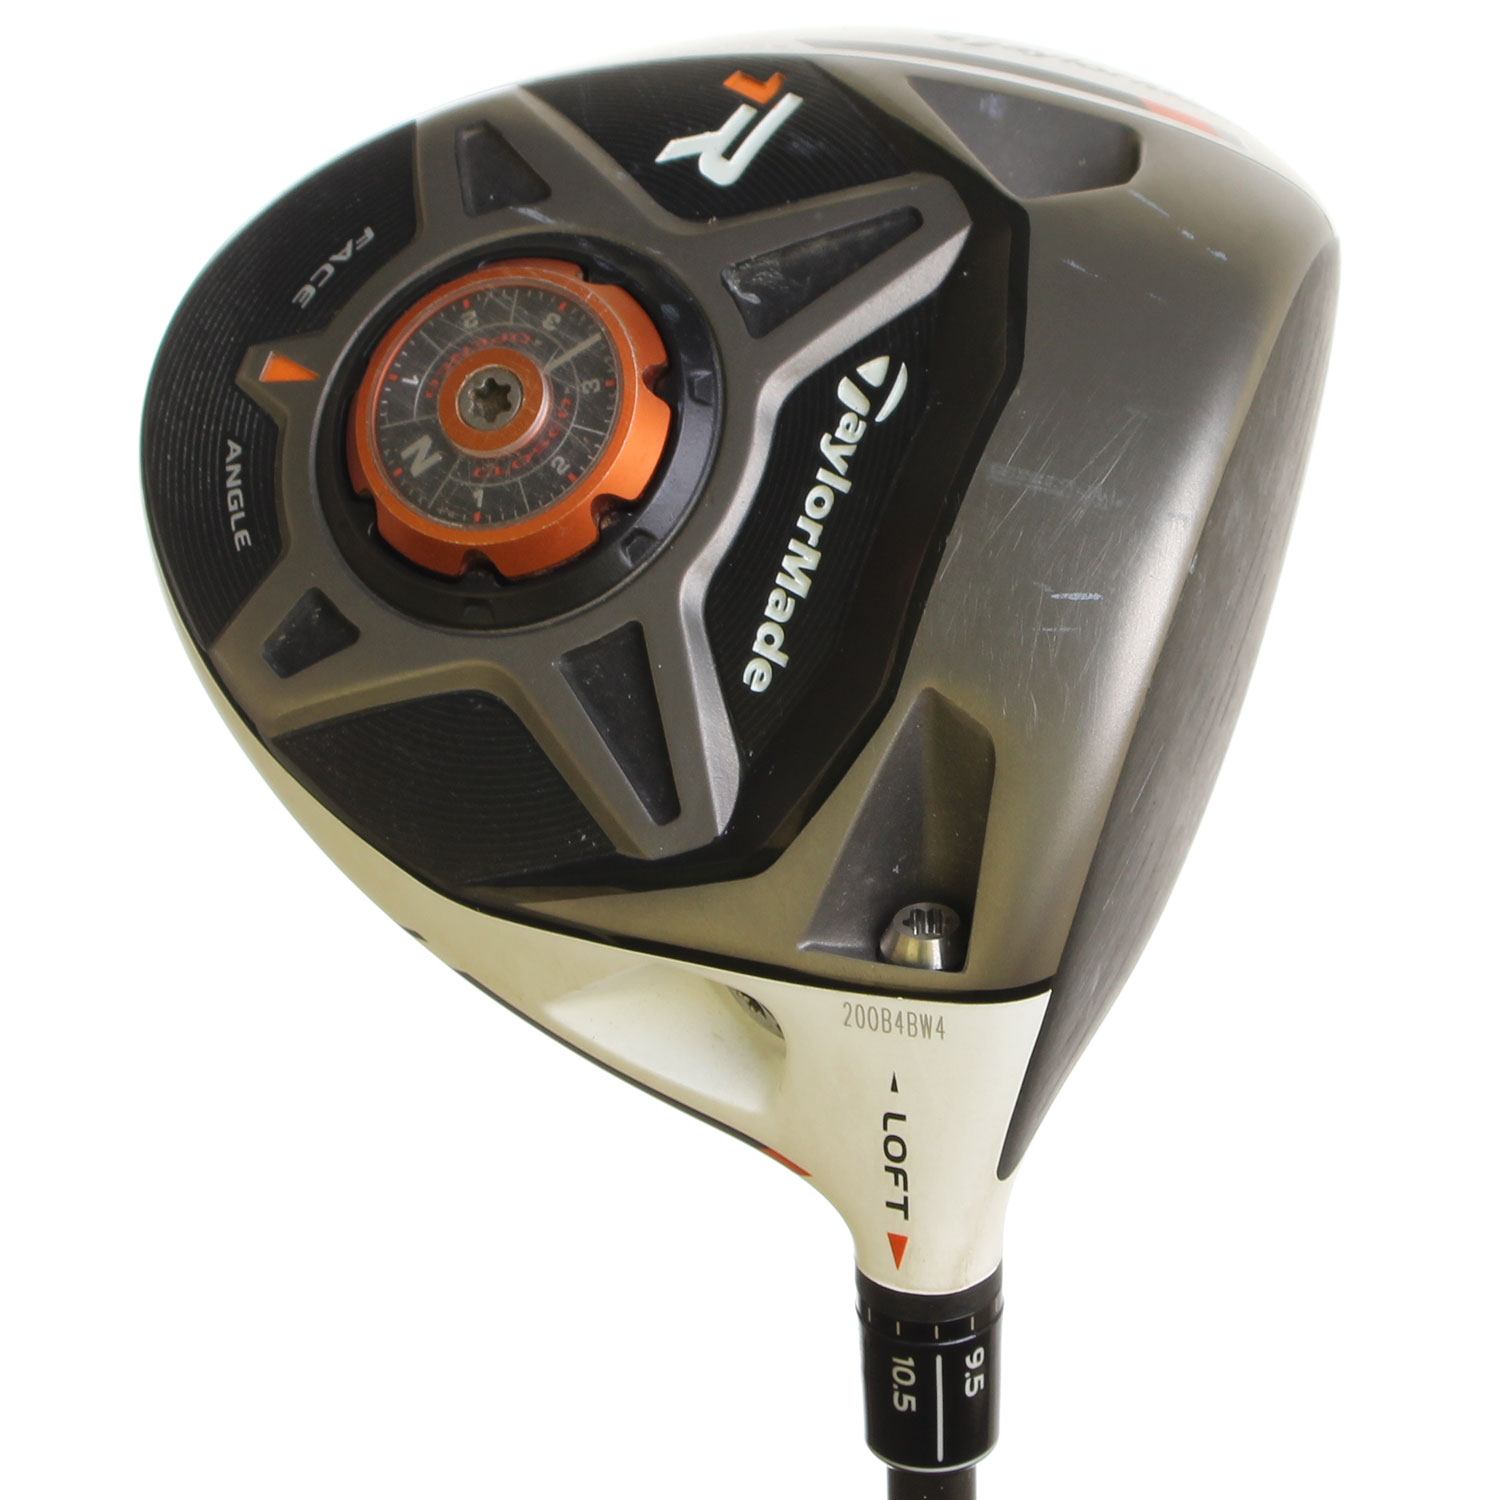 Taylormade r1 driver settings for slice